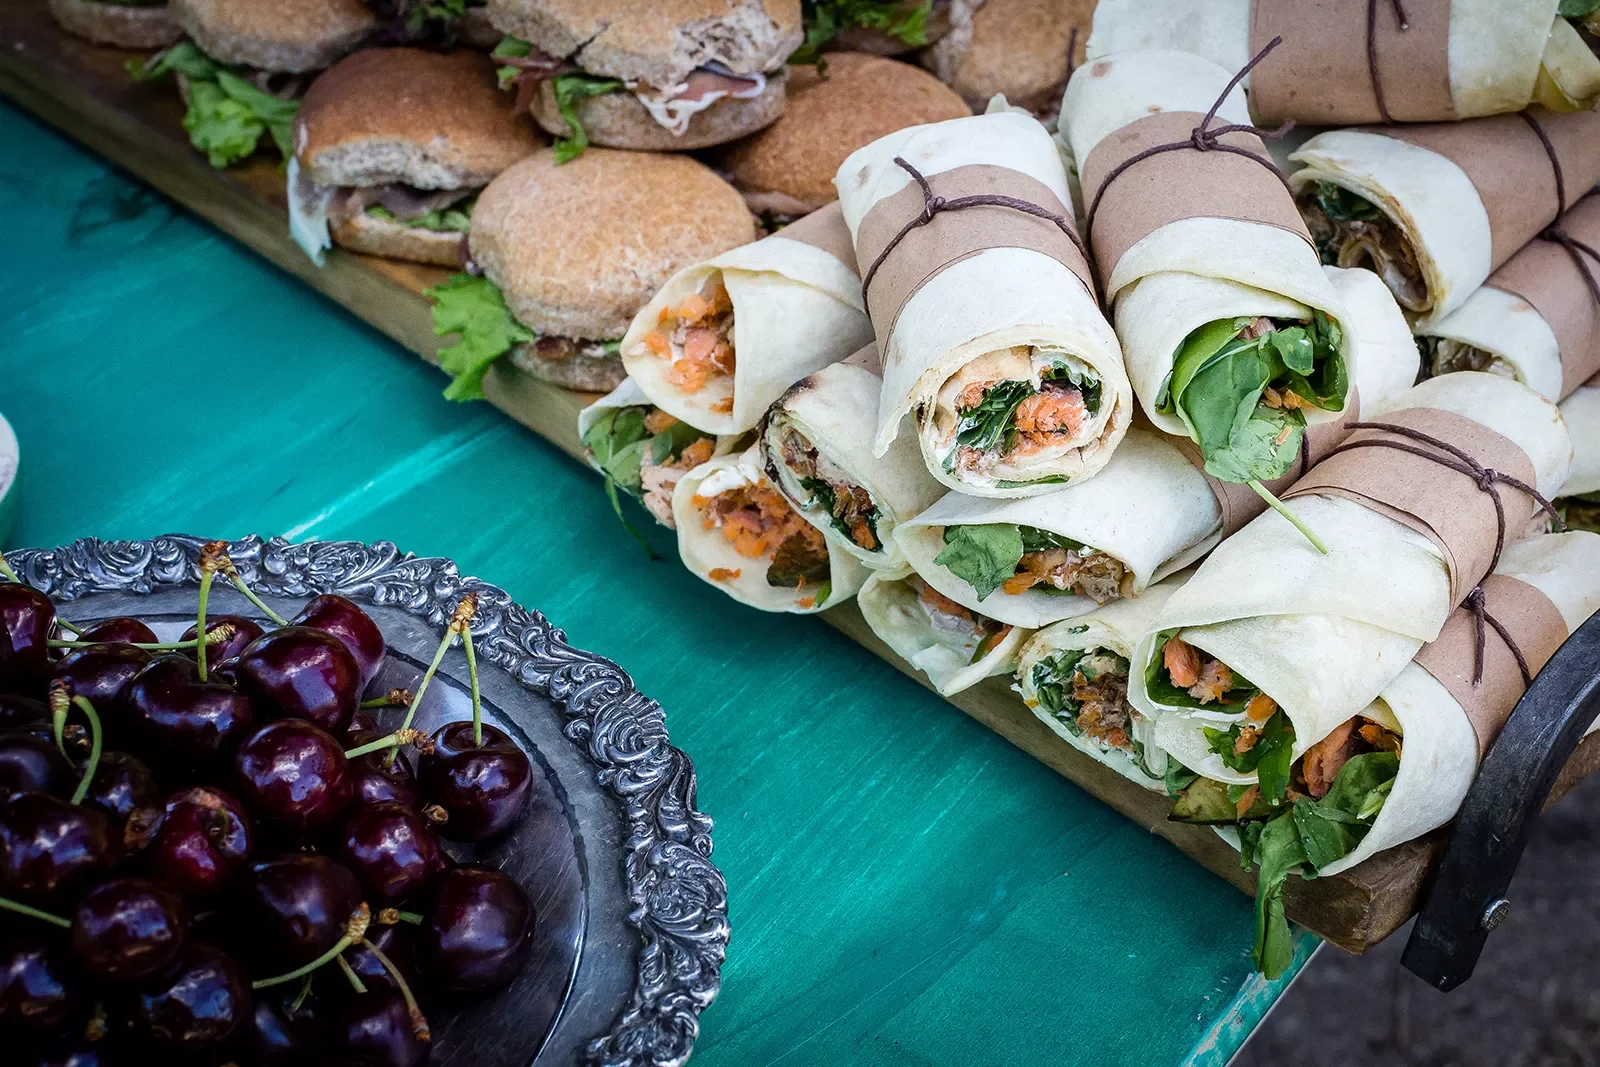 Platter of sandwiches and wraps, cherries.